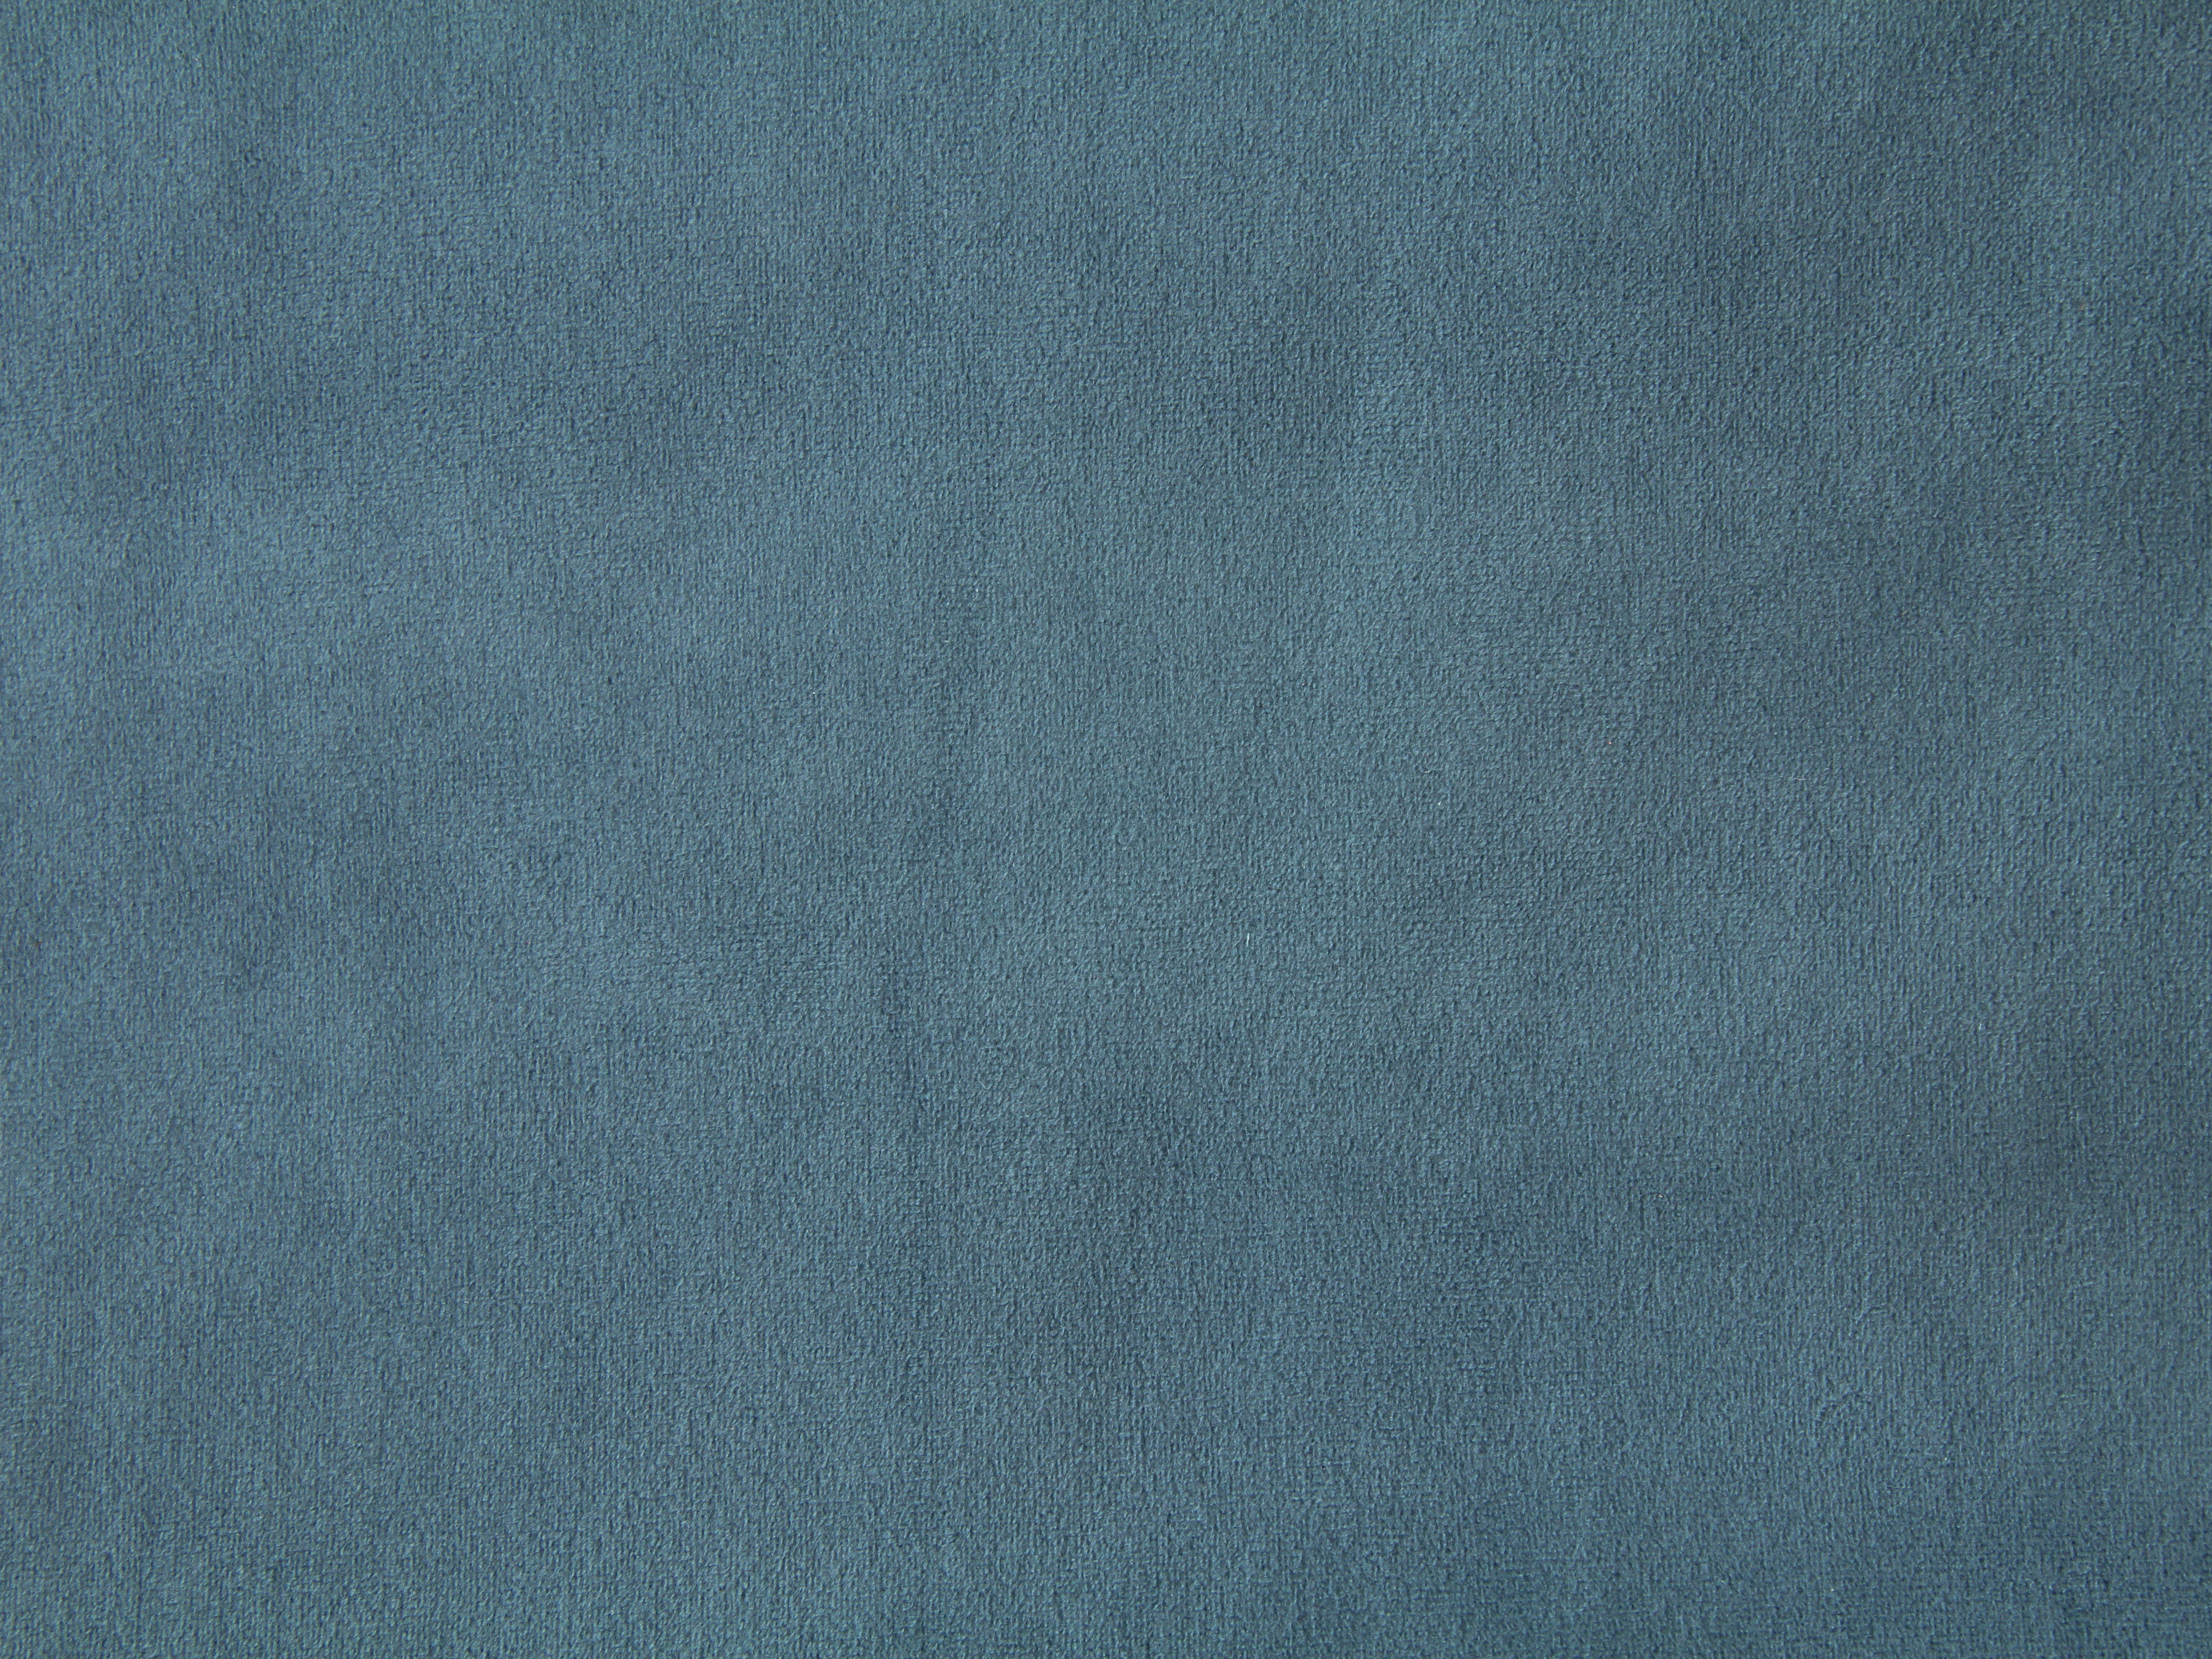 Textures Blue Suede Texture Slate Fabric Cloth Soft Fuzz Wallpaper